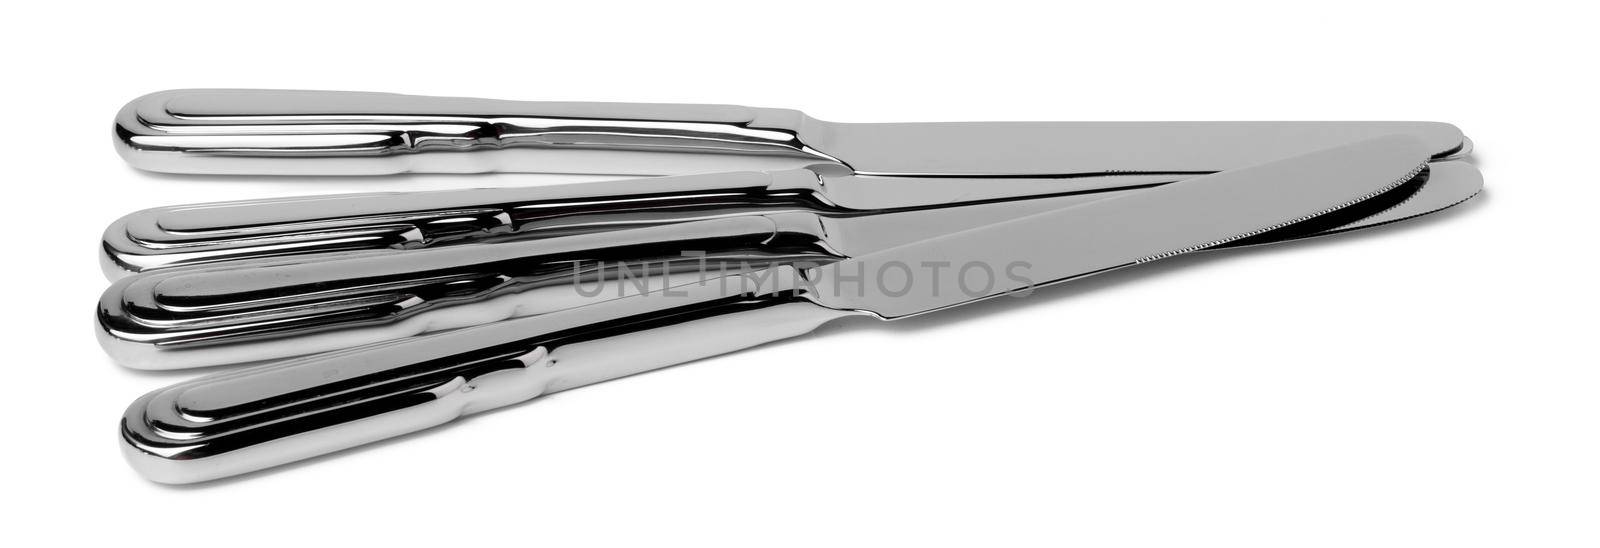 Set of new cutlery isolated on white background by Fabrikasimf